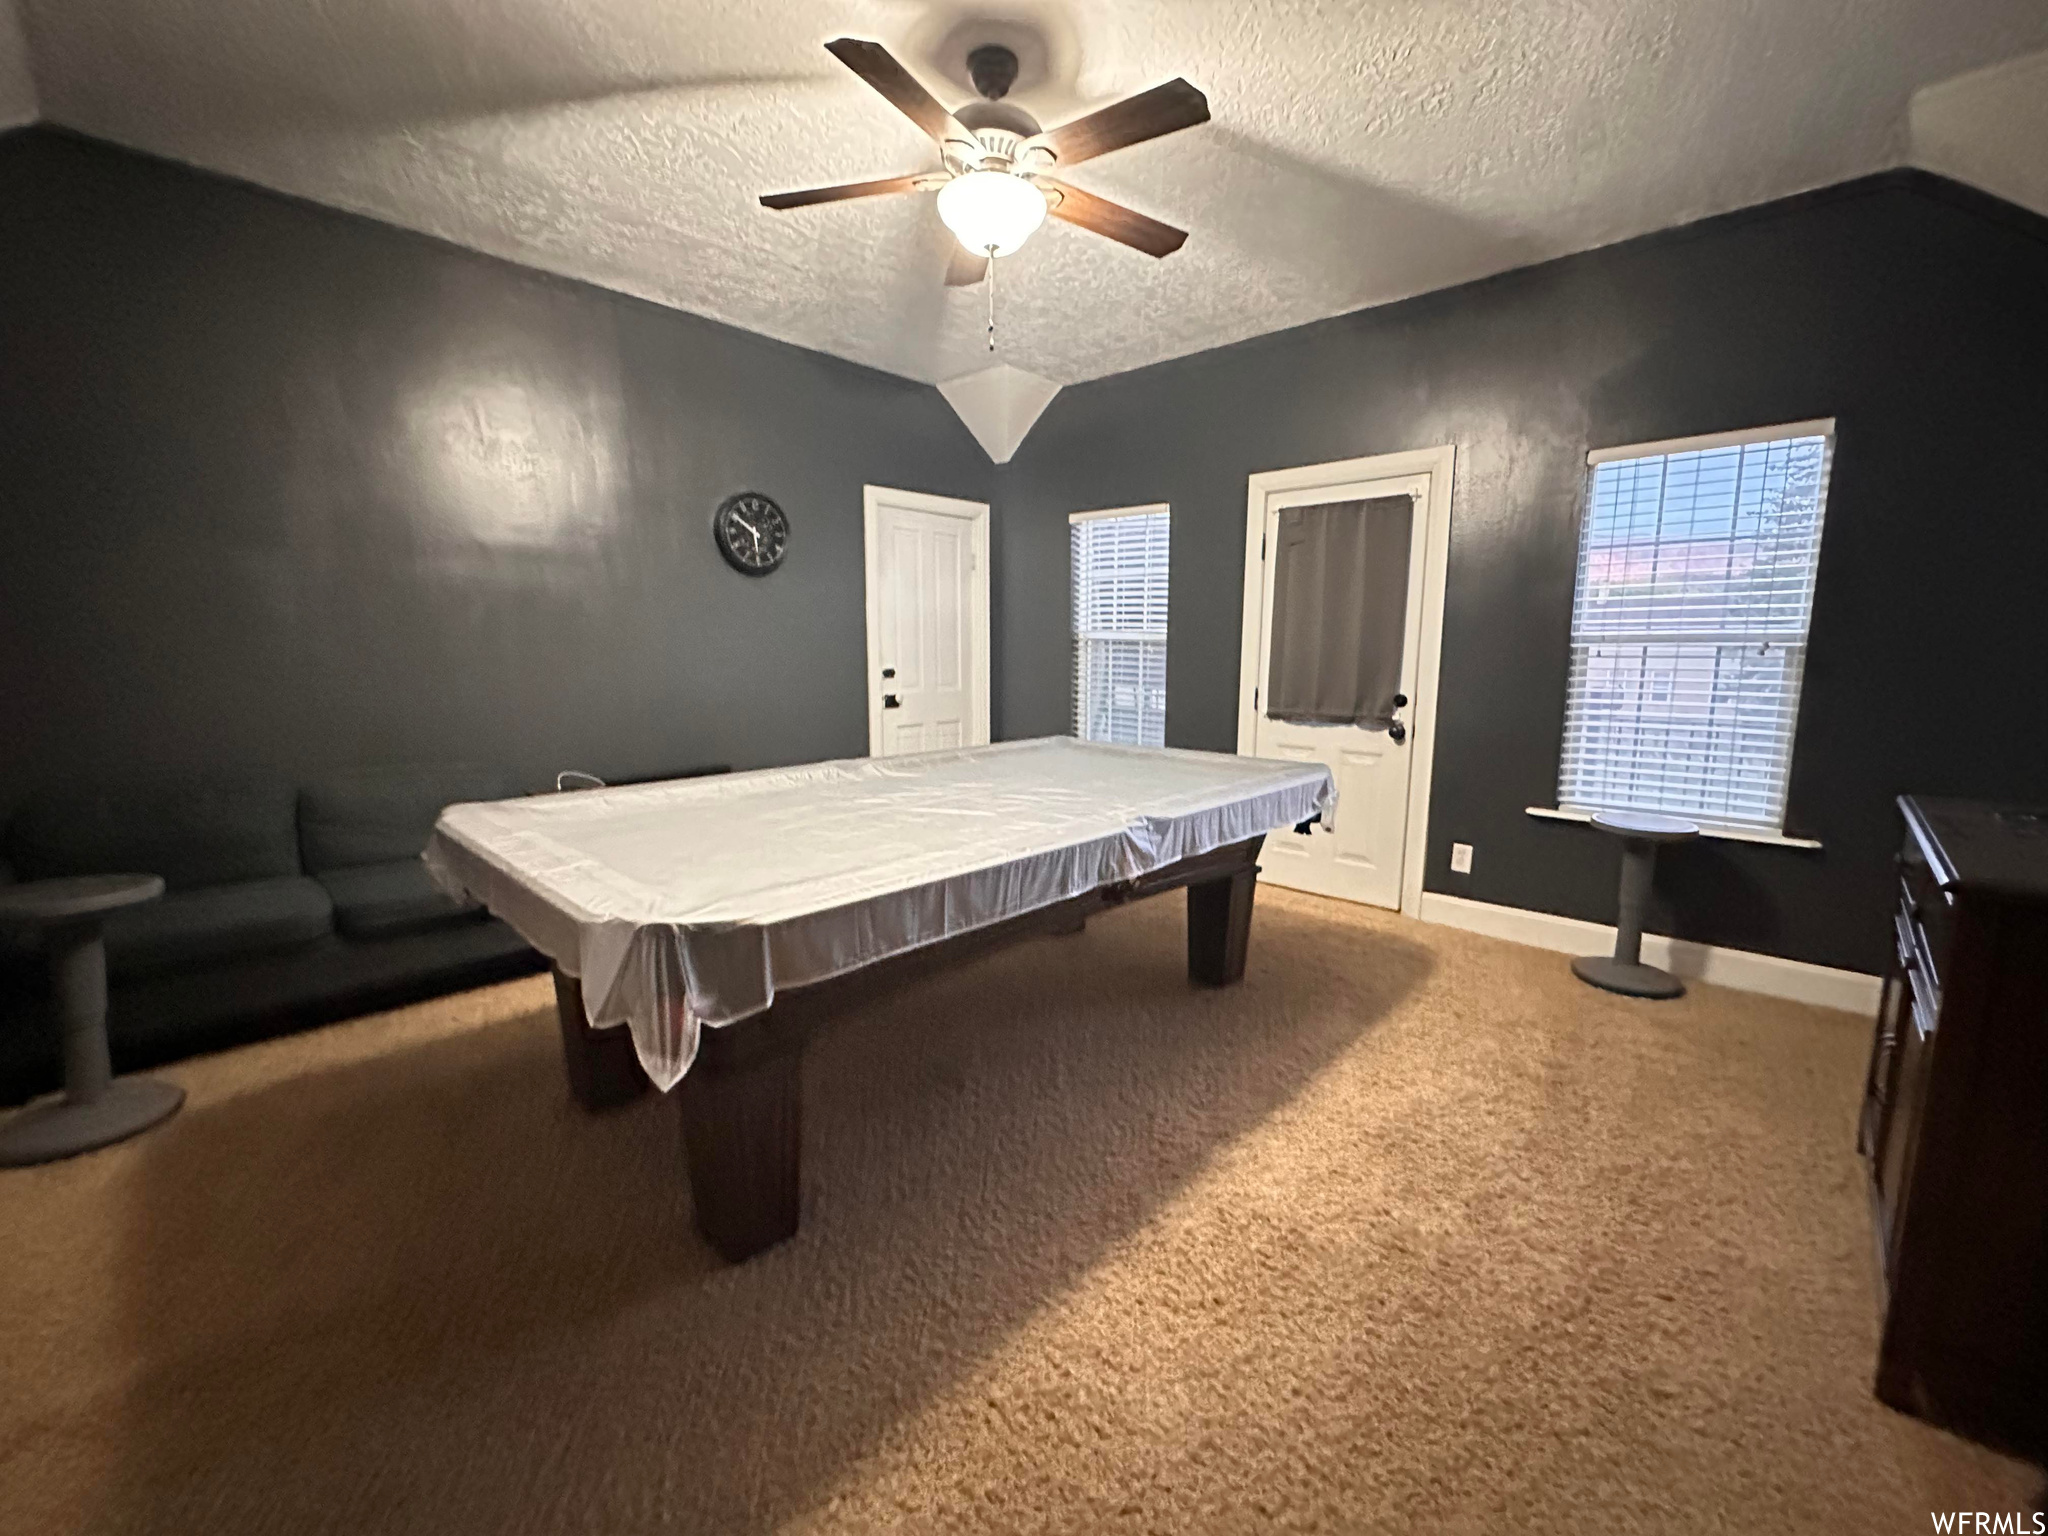 Recreation room featuring a textured ceiling, pool table, carpet, and ceiling fan